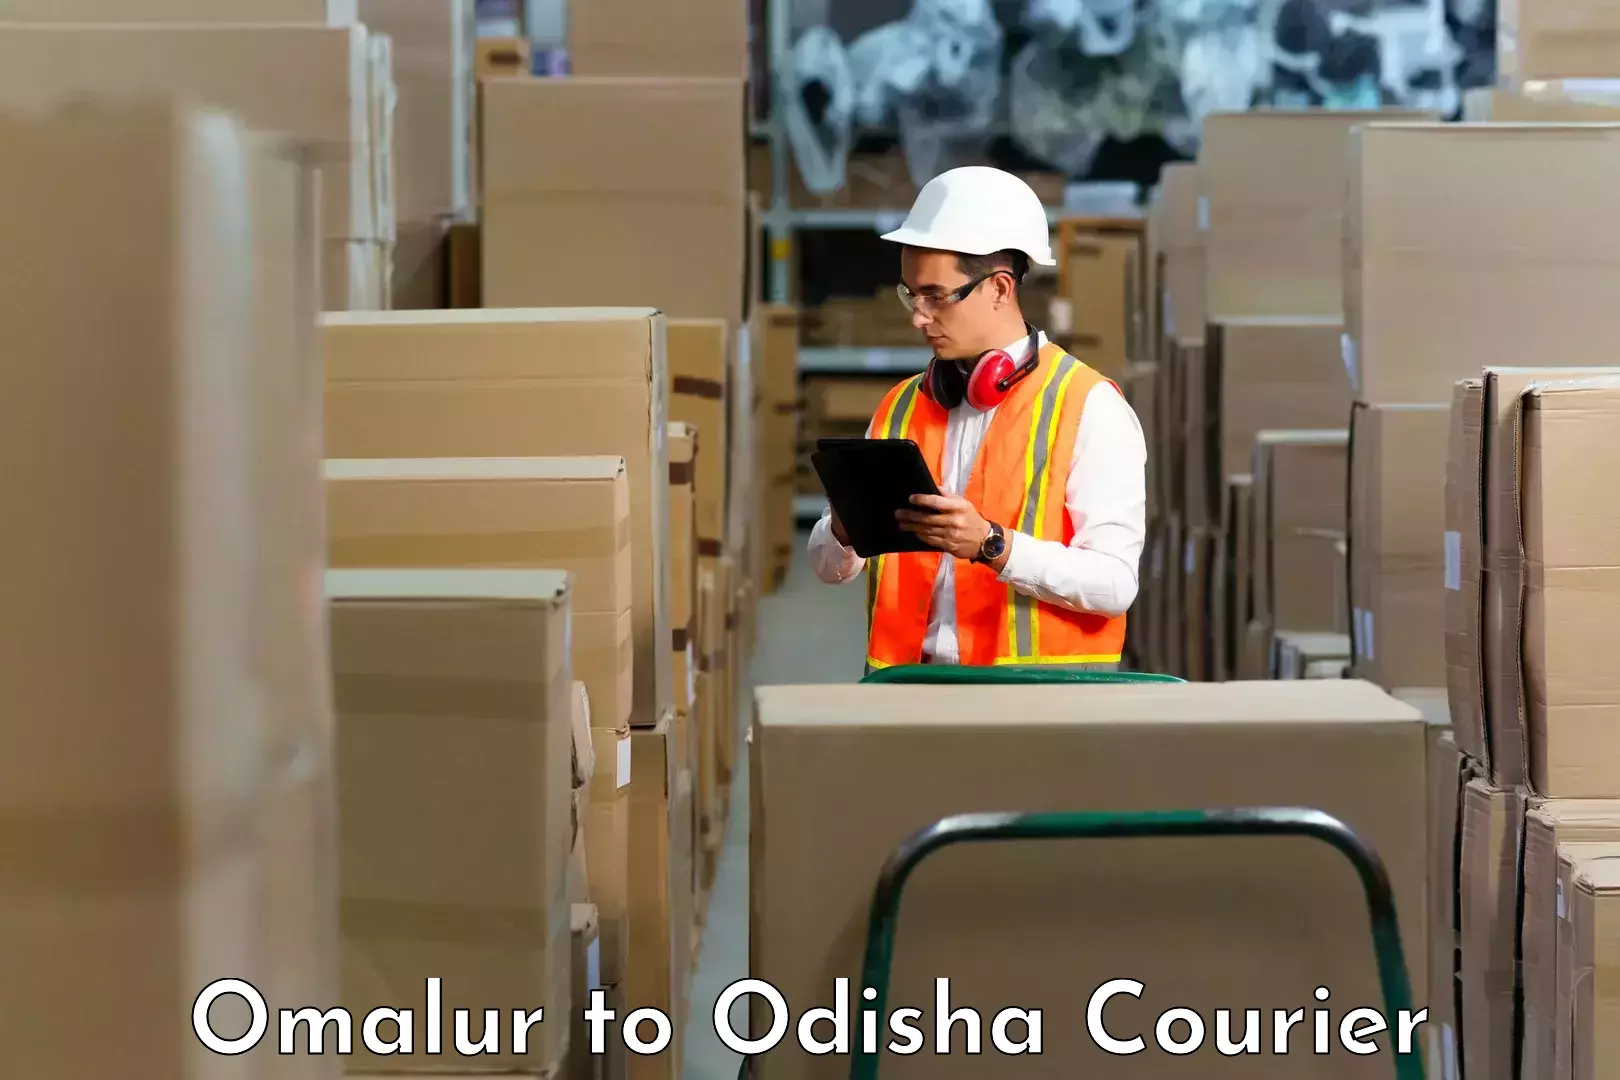 Courier service innovation in Omalur to Dandisahi